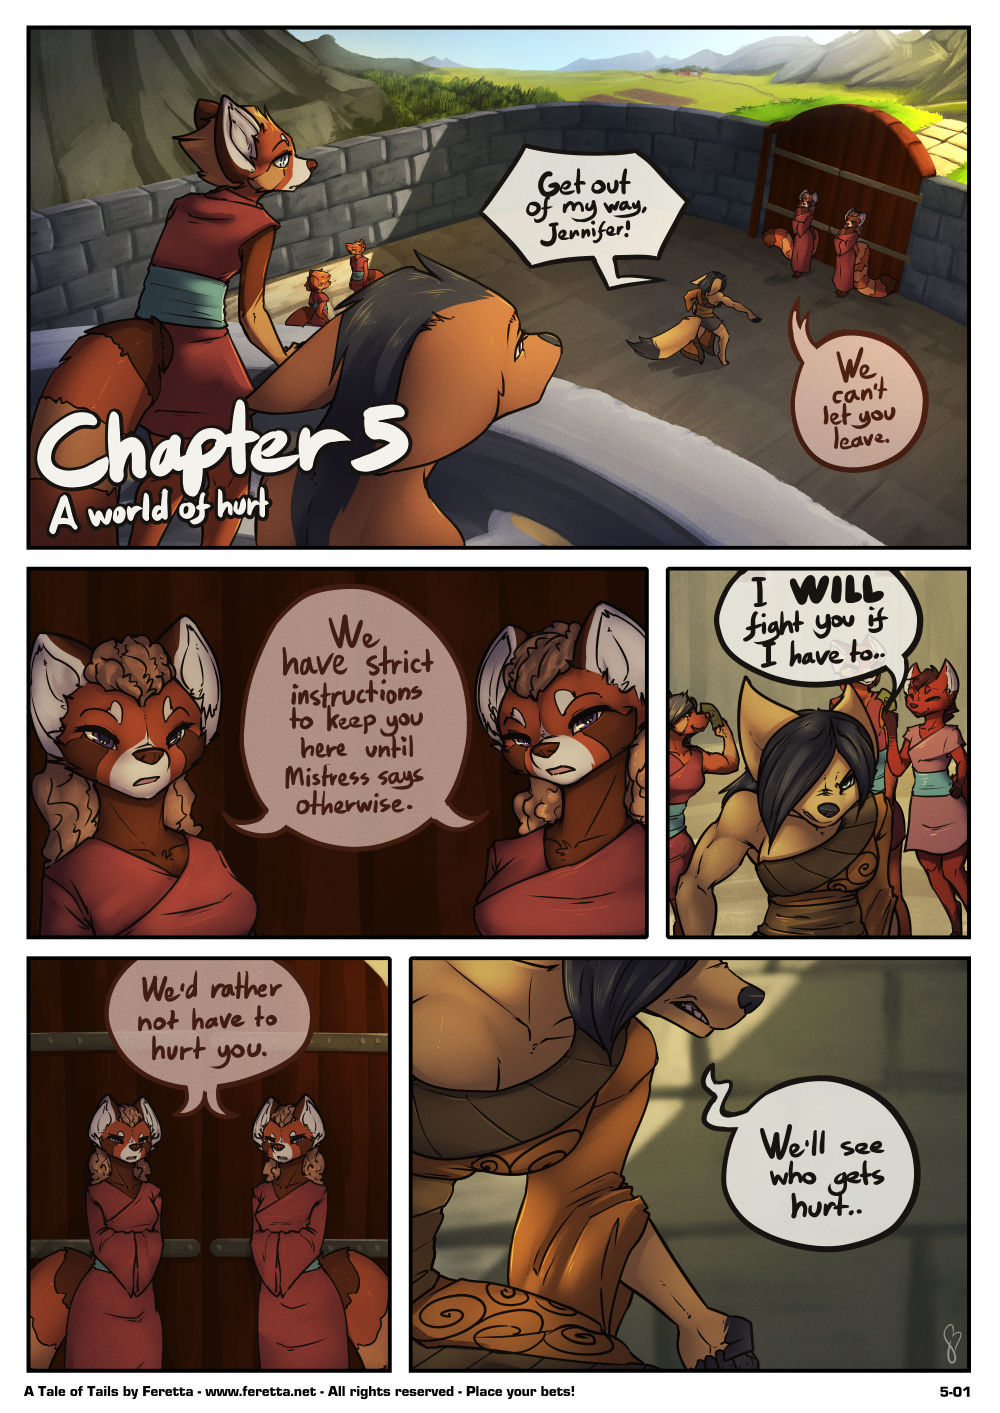 A Tale of Tails Chapter 5 - World of Hurt (Feretta) page 1